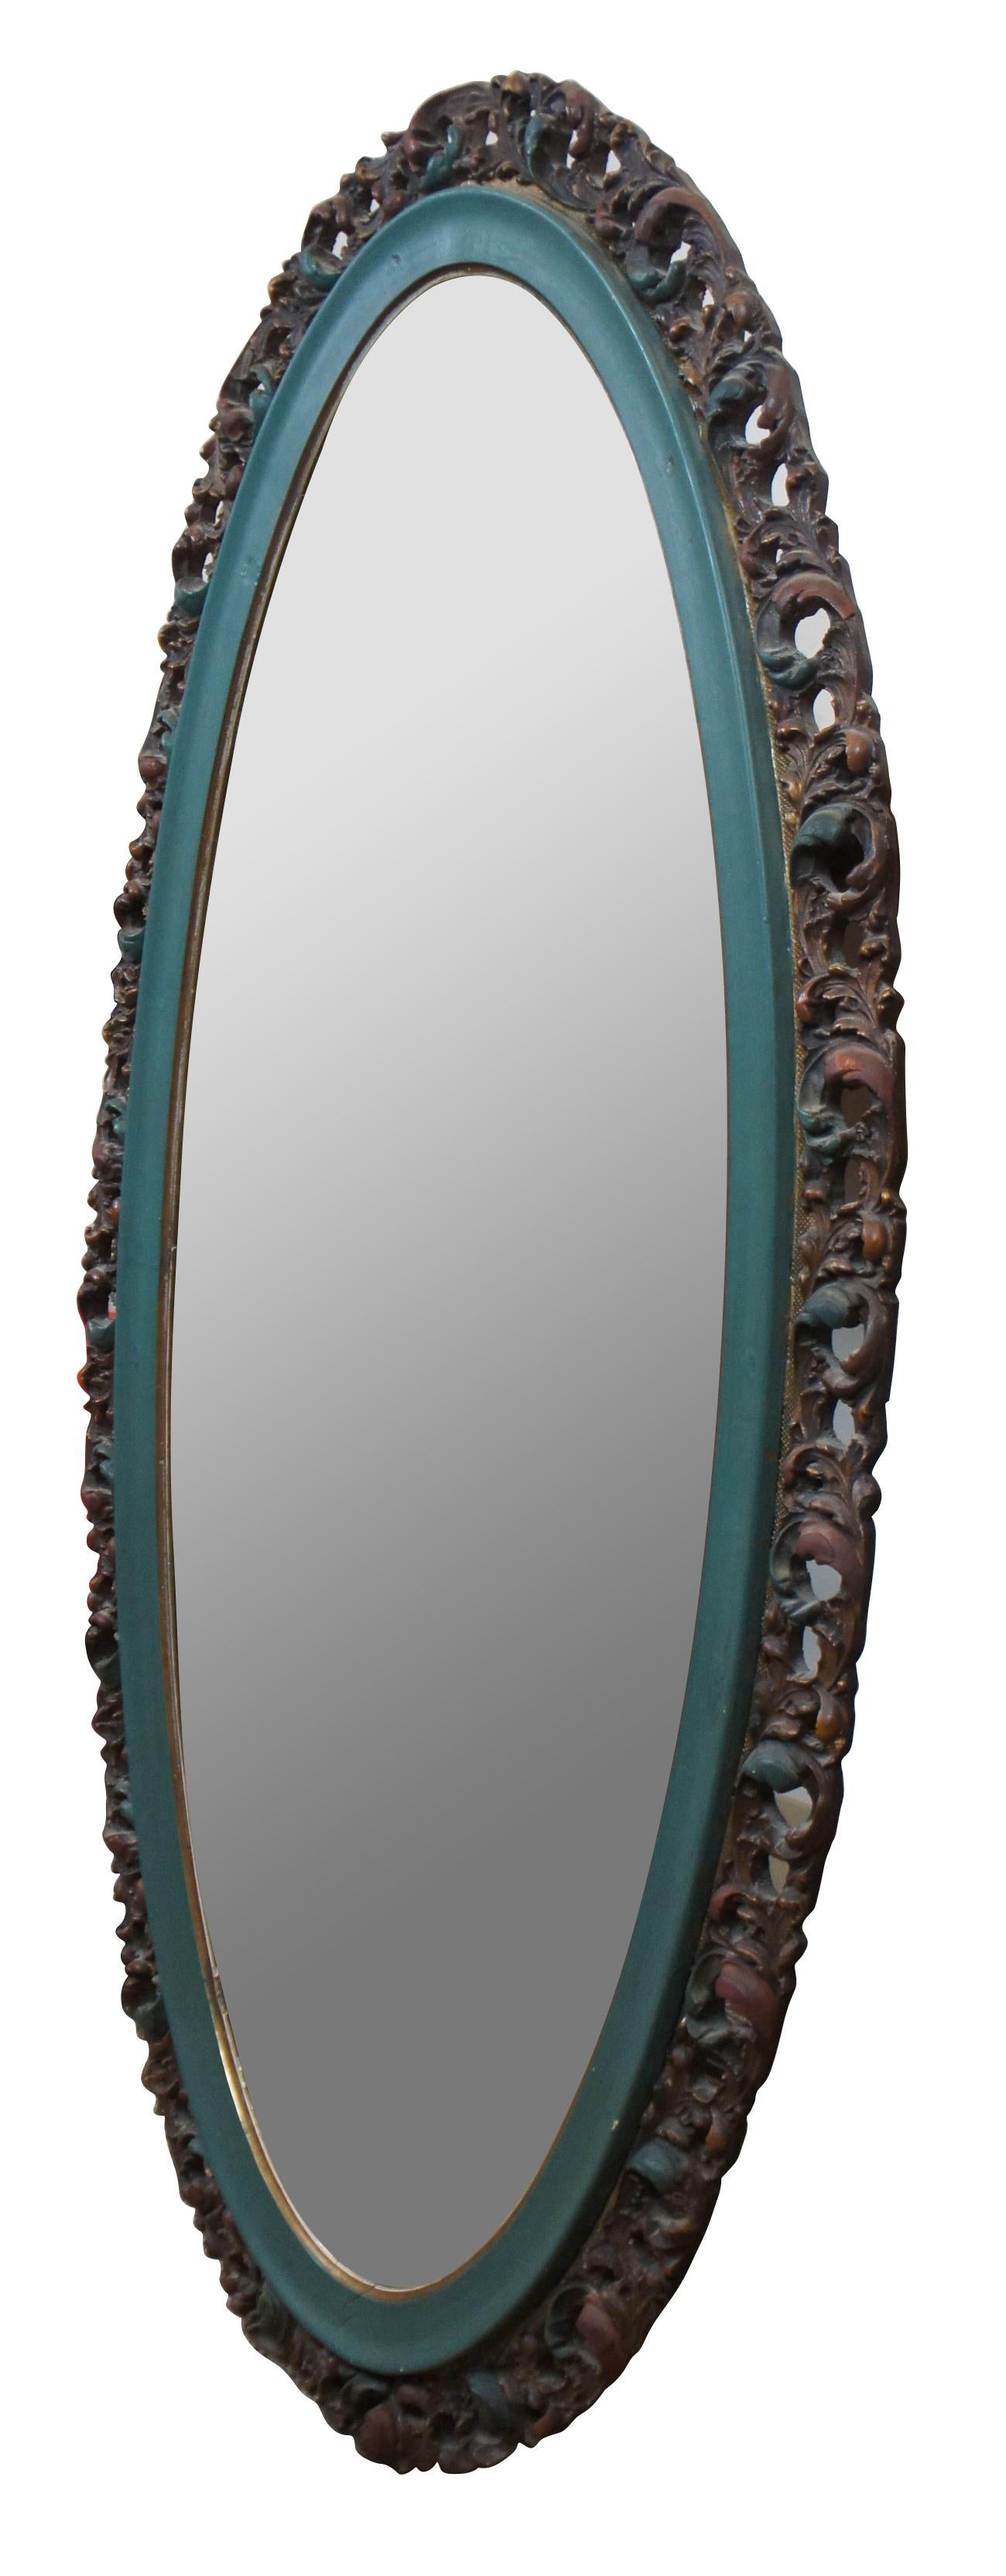 Antique early 20th century beveled oval wall mirror by the Von Gerichten Art Glass Co of Columbus, Ohio featuring French or Italian Rococo styling with reticulated or pierced accents and painted wood frame carved with swirling leaves in turquoise,